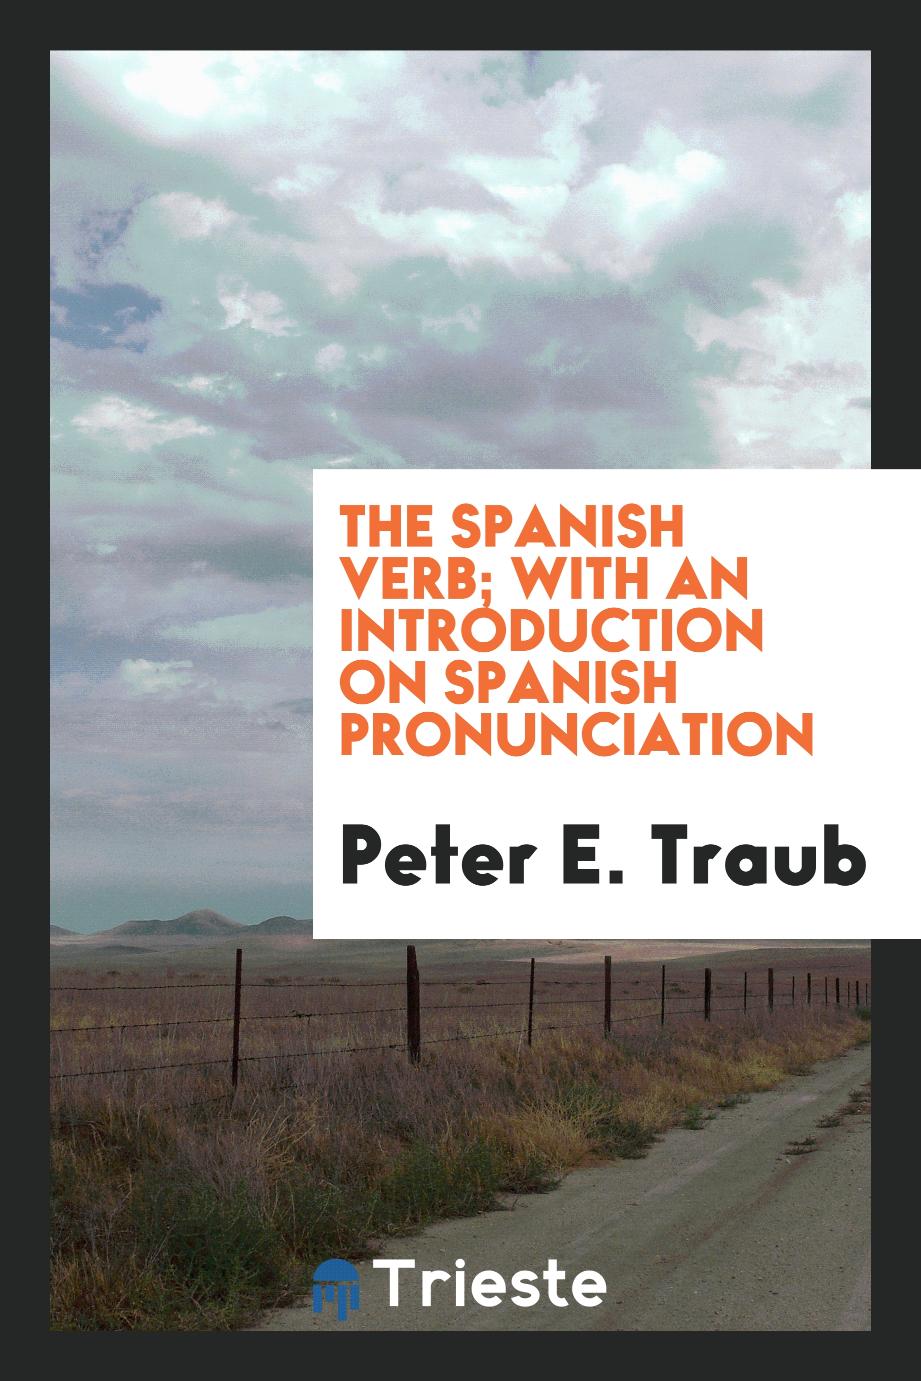 The Spanish verb; with an introduction on Spanish pronunciation